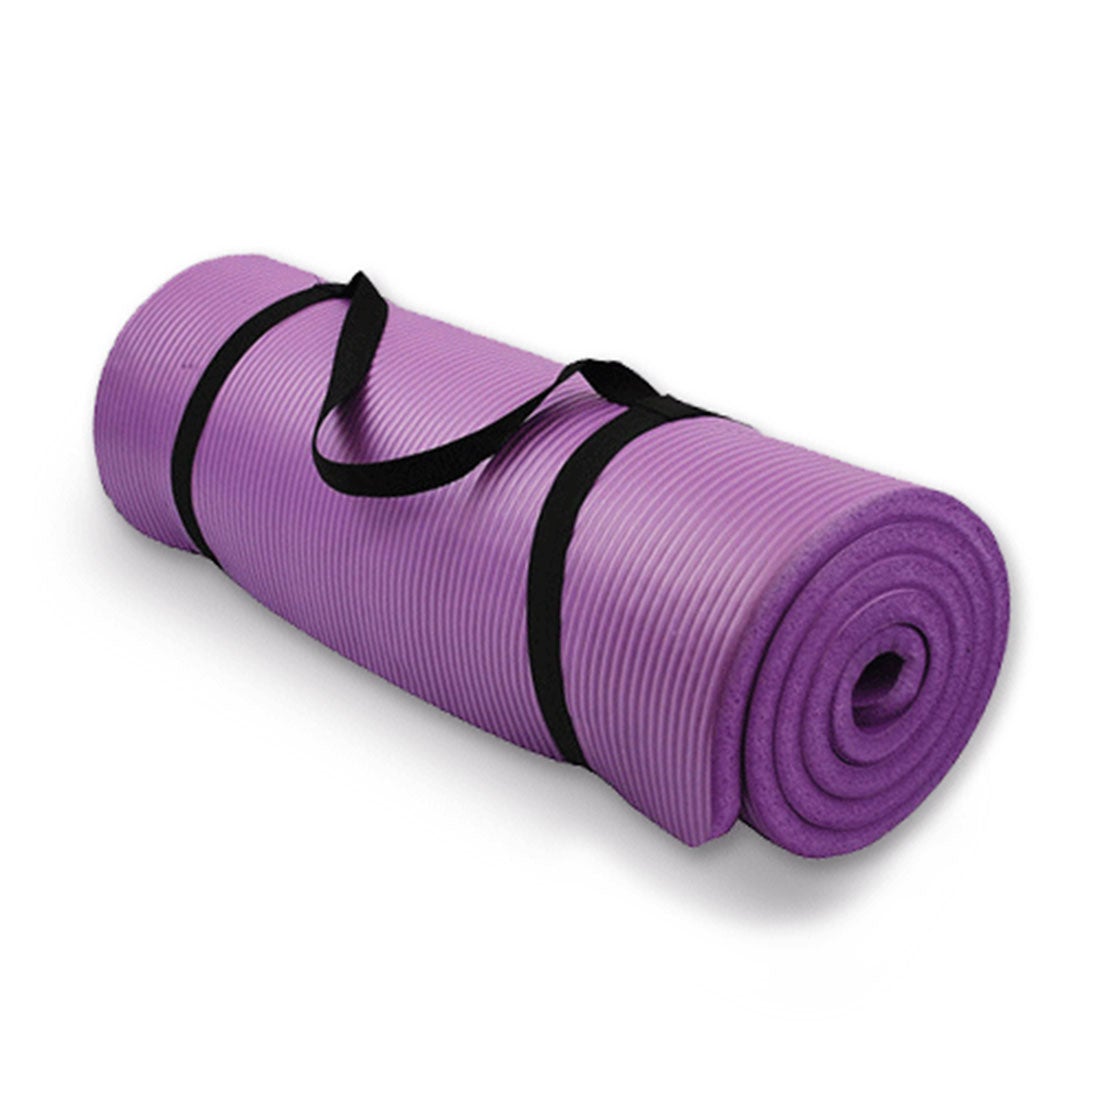 Extra Wide & Thick Yoga Mat - 72 x 32 x 1/3, Double-Sided Non